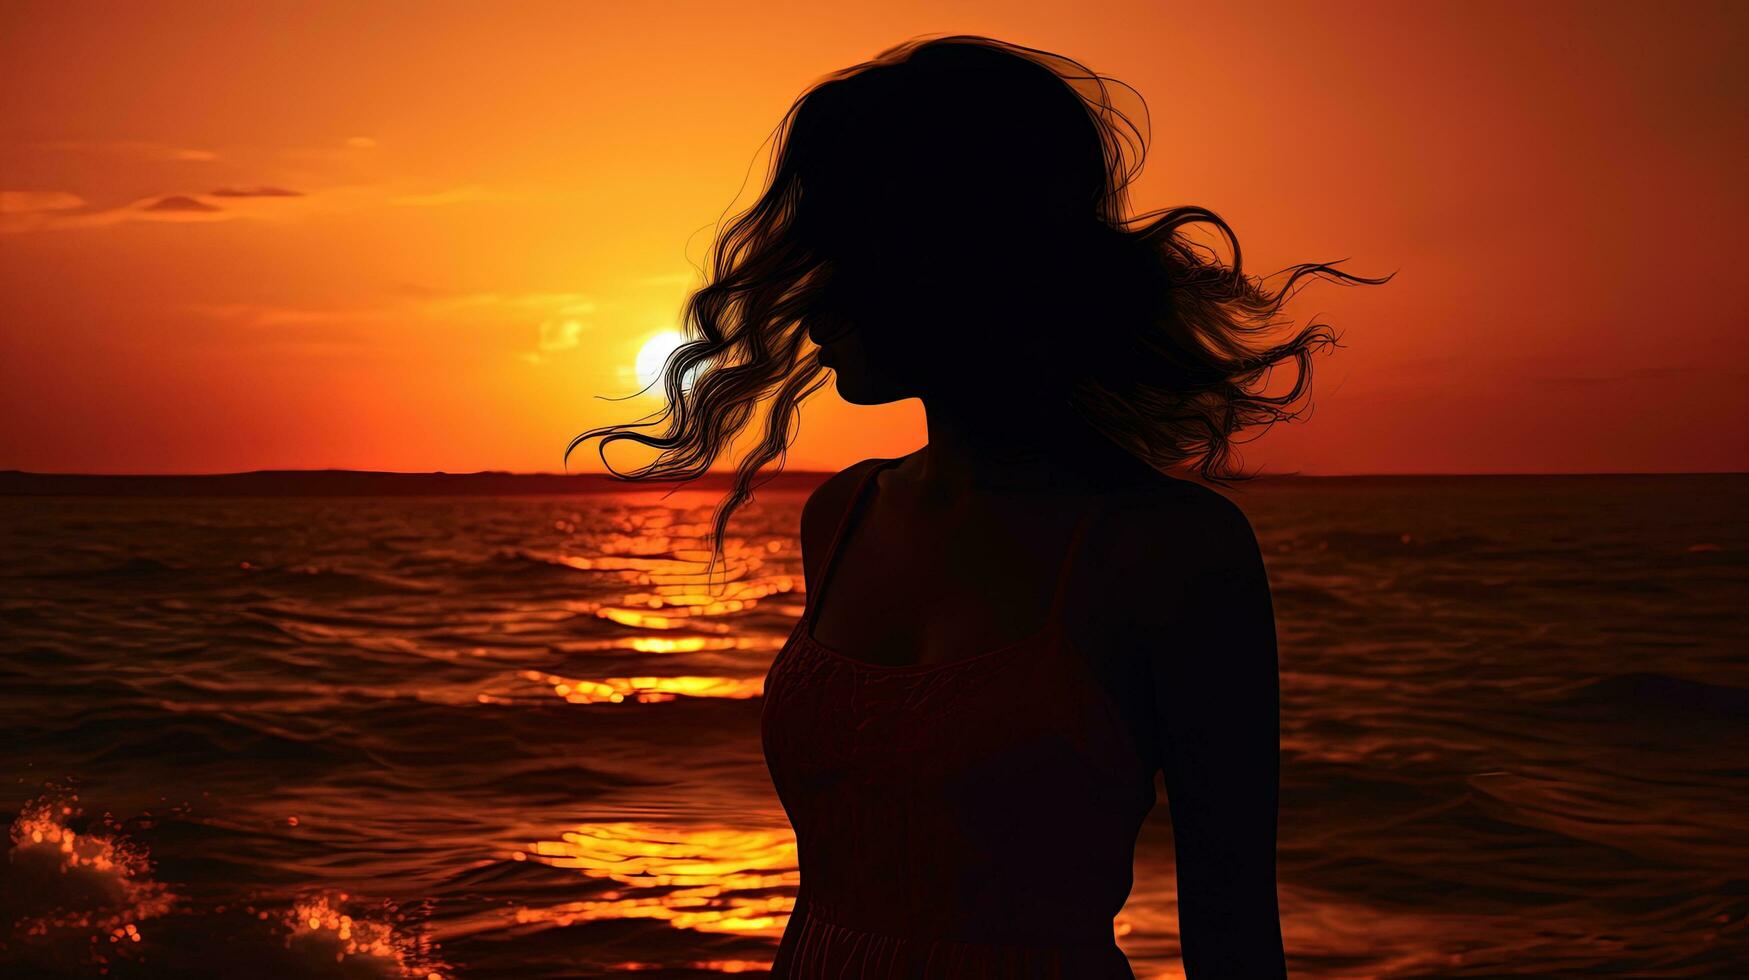 Girl s silhouette against sea and sunset photo